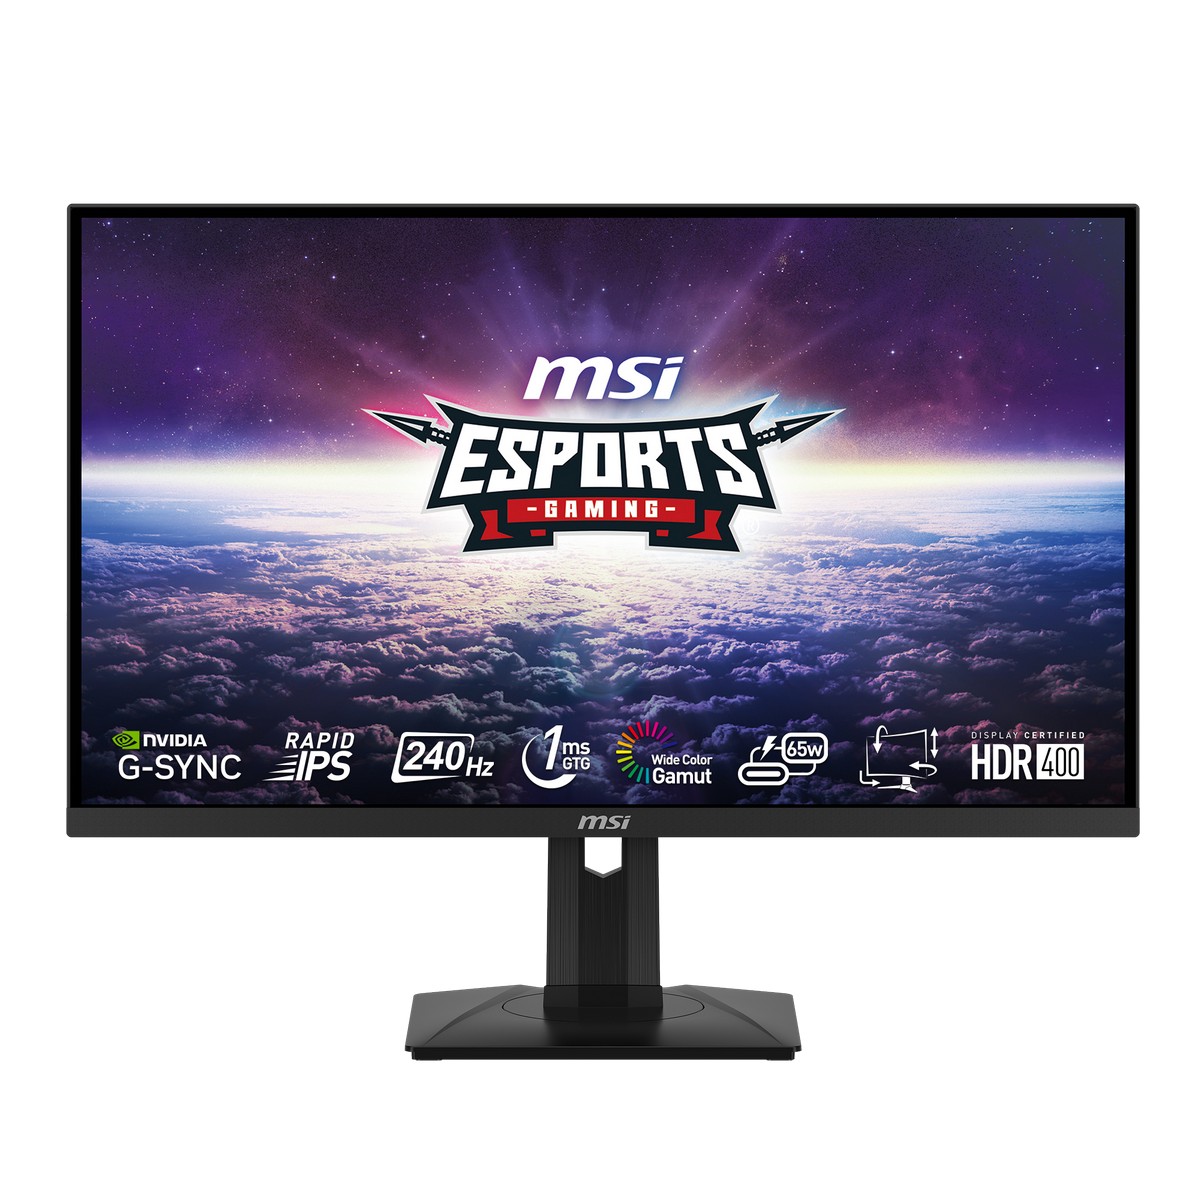 MSI 27" G274QPX 2560x1440 Rapid IPS 240Hz 1ms G-Sync HDR 400 Widescreen Gaming Monitor